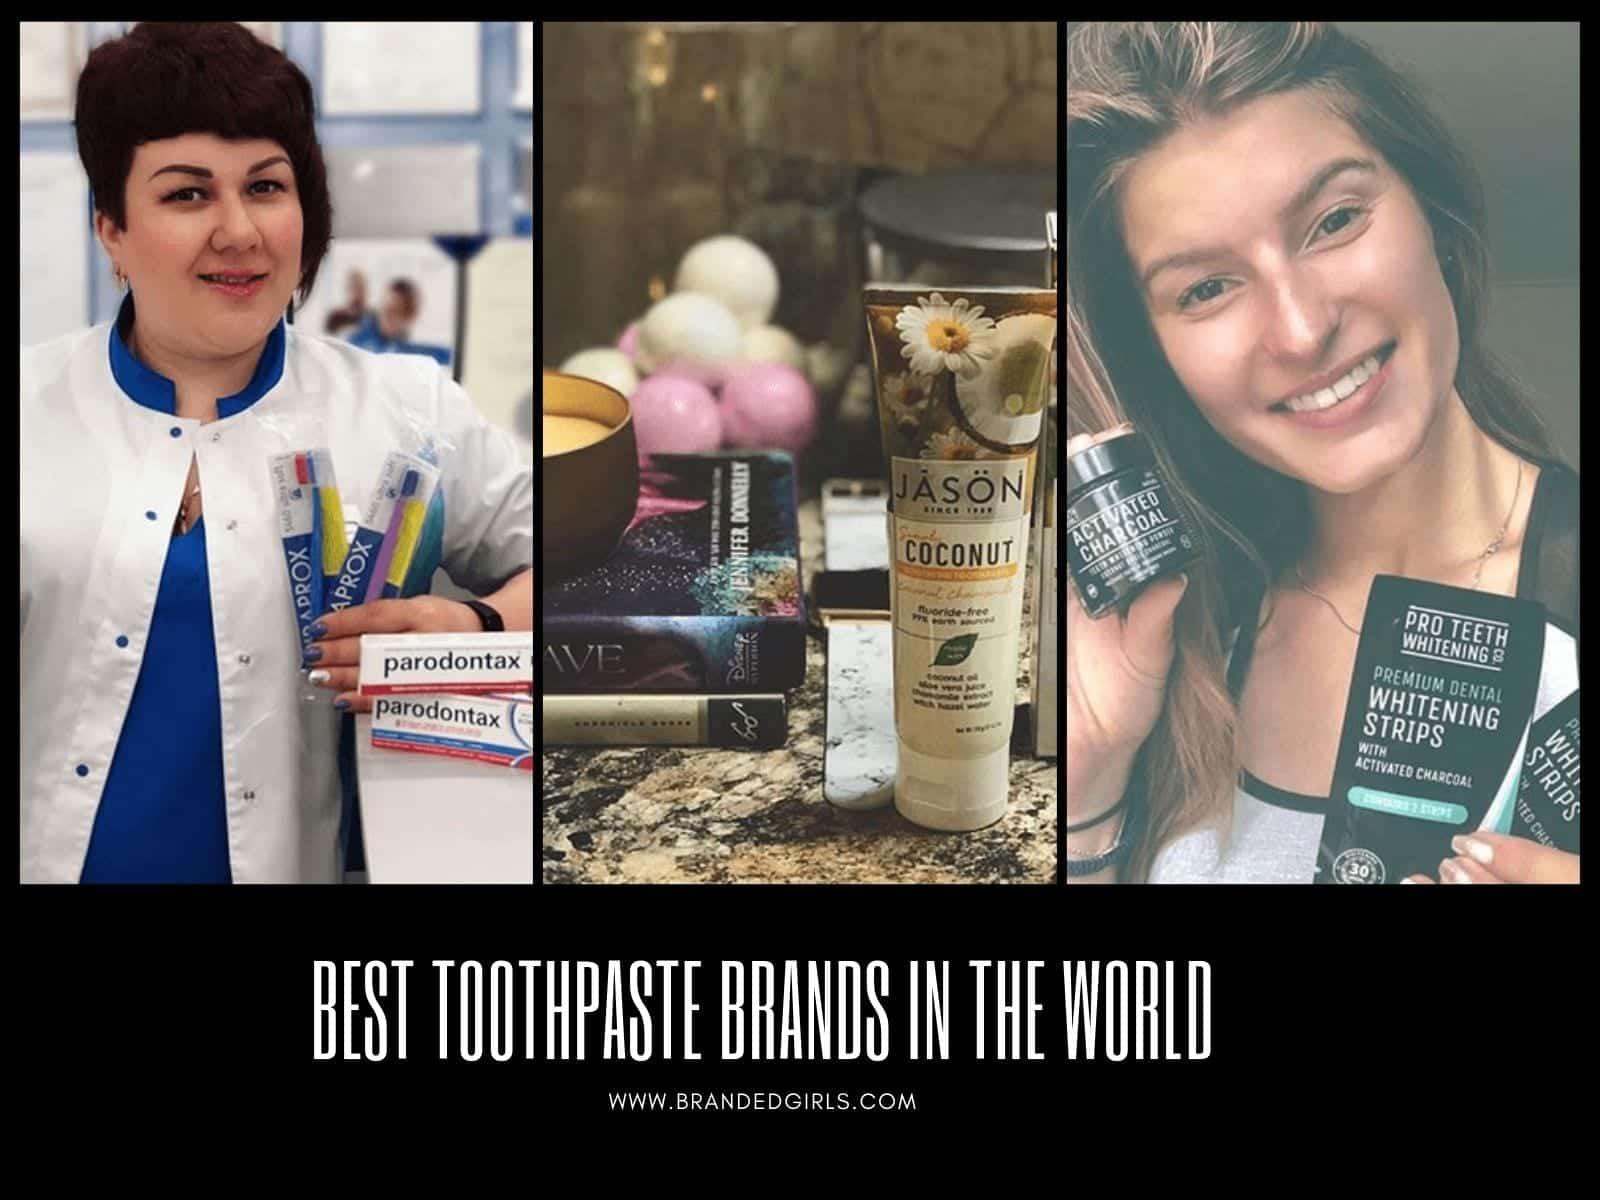 16 Best Toothpaste Brands In The World To Buy In 2022